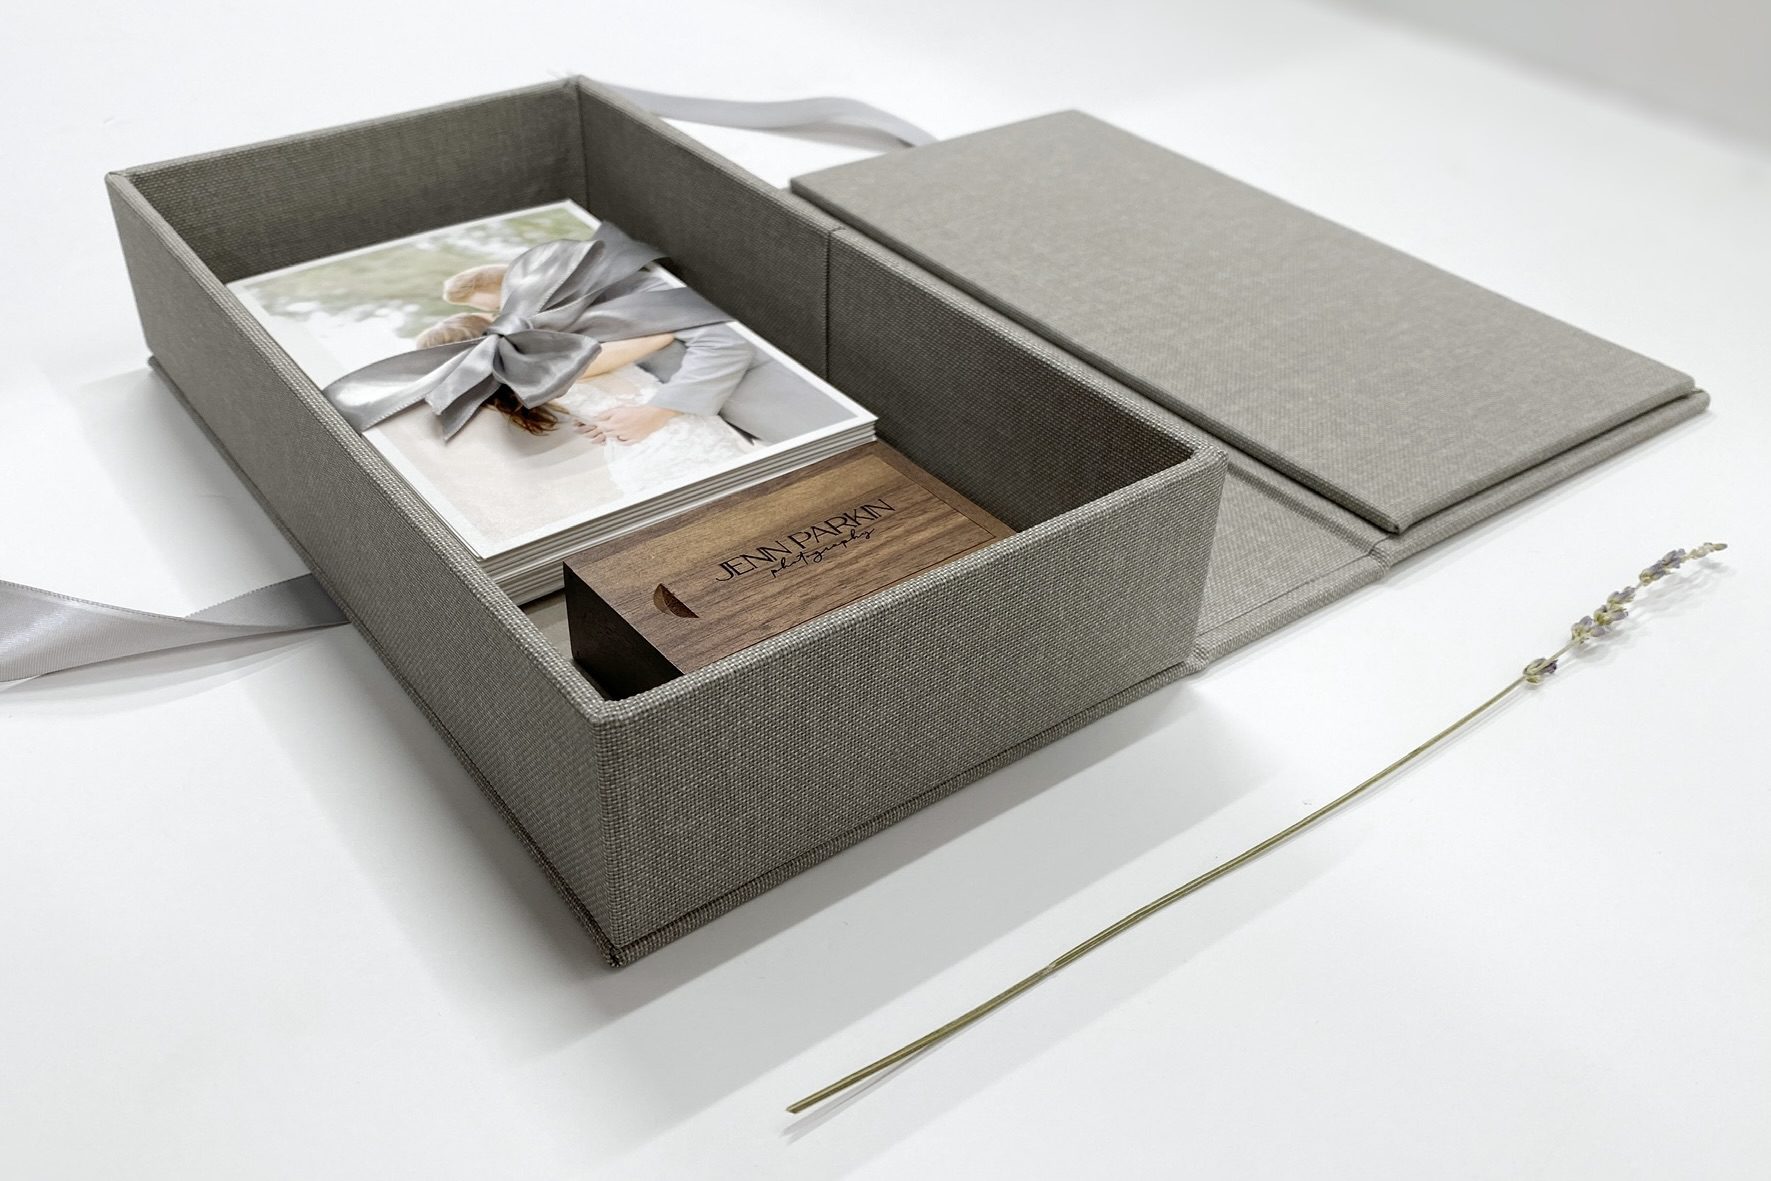 hand made linen presentation cases that display photo prints by lifethreads albums by D&R Photo canada